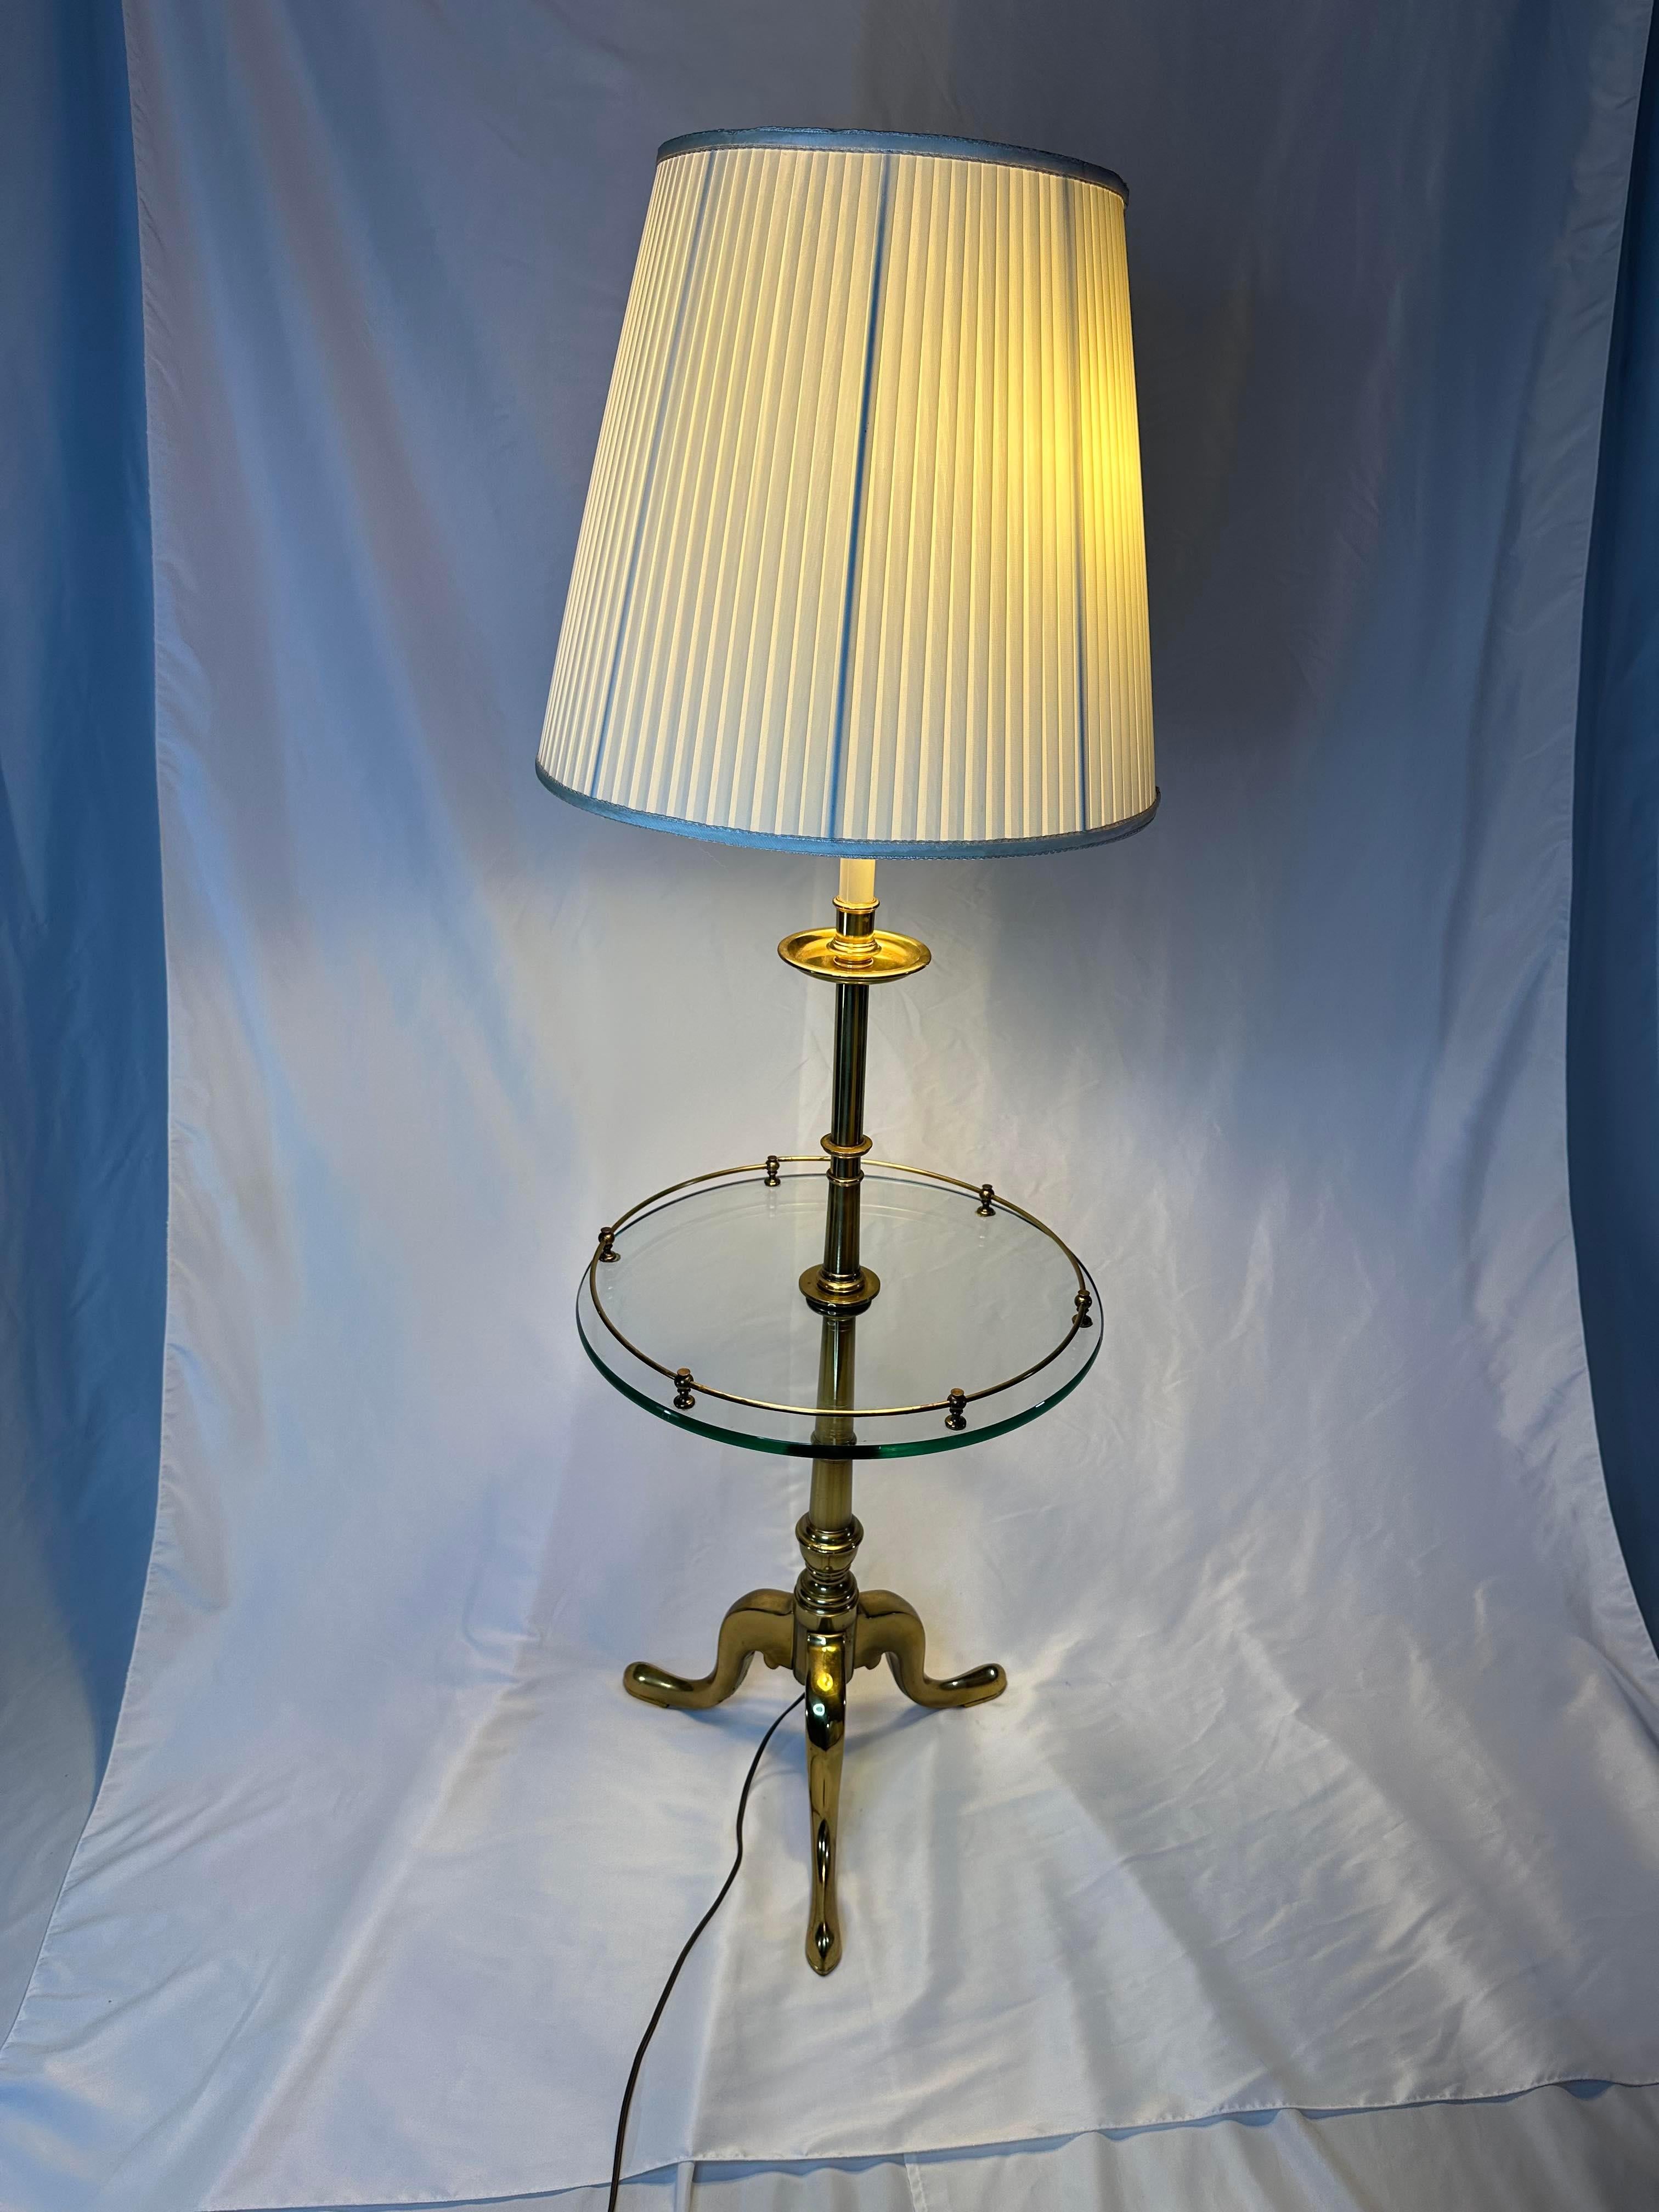 French Provincial Stiffel Floor Lamp With Glass Table and tripod legs For Sale 29